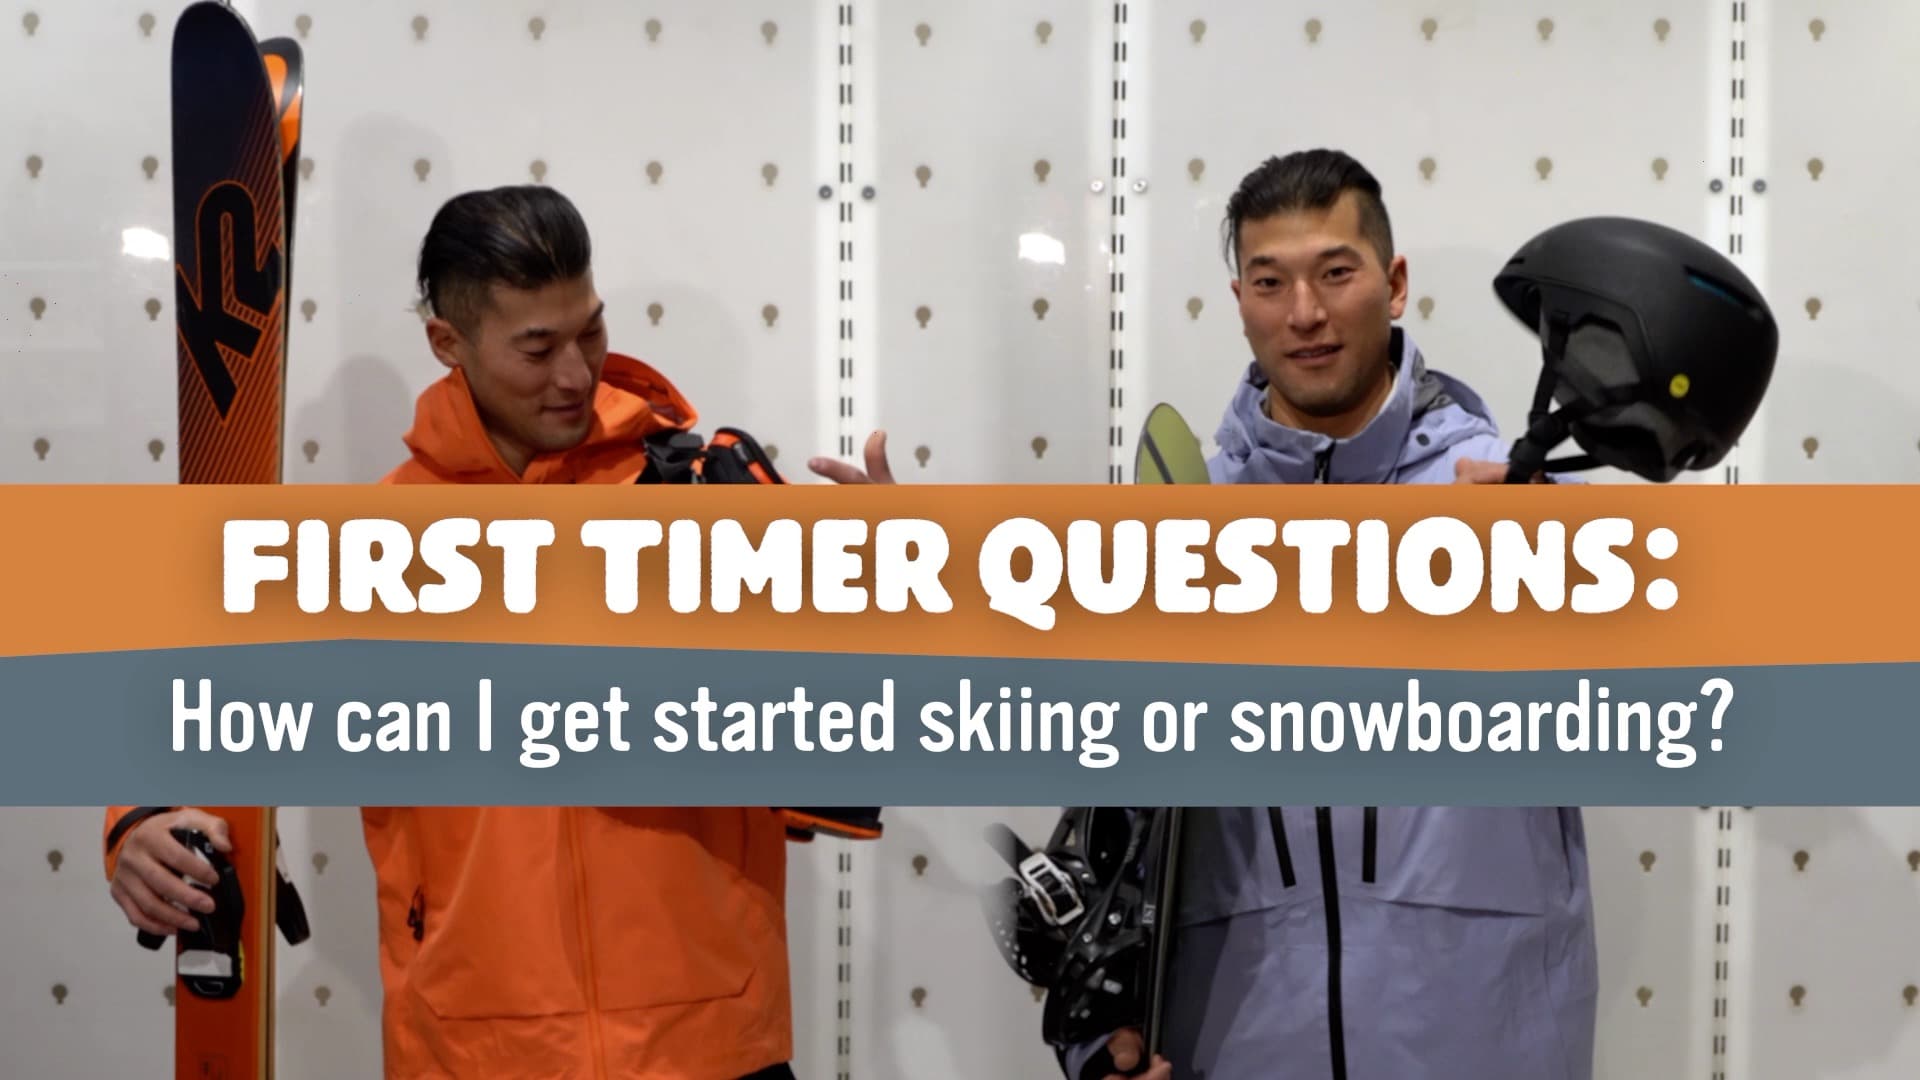 Featured Image for “FIRST TIMER QUESTIONS: How can I get started skiing or snowboarding?”